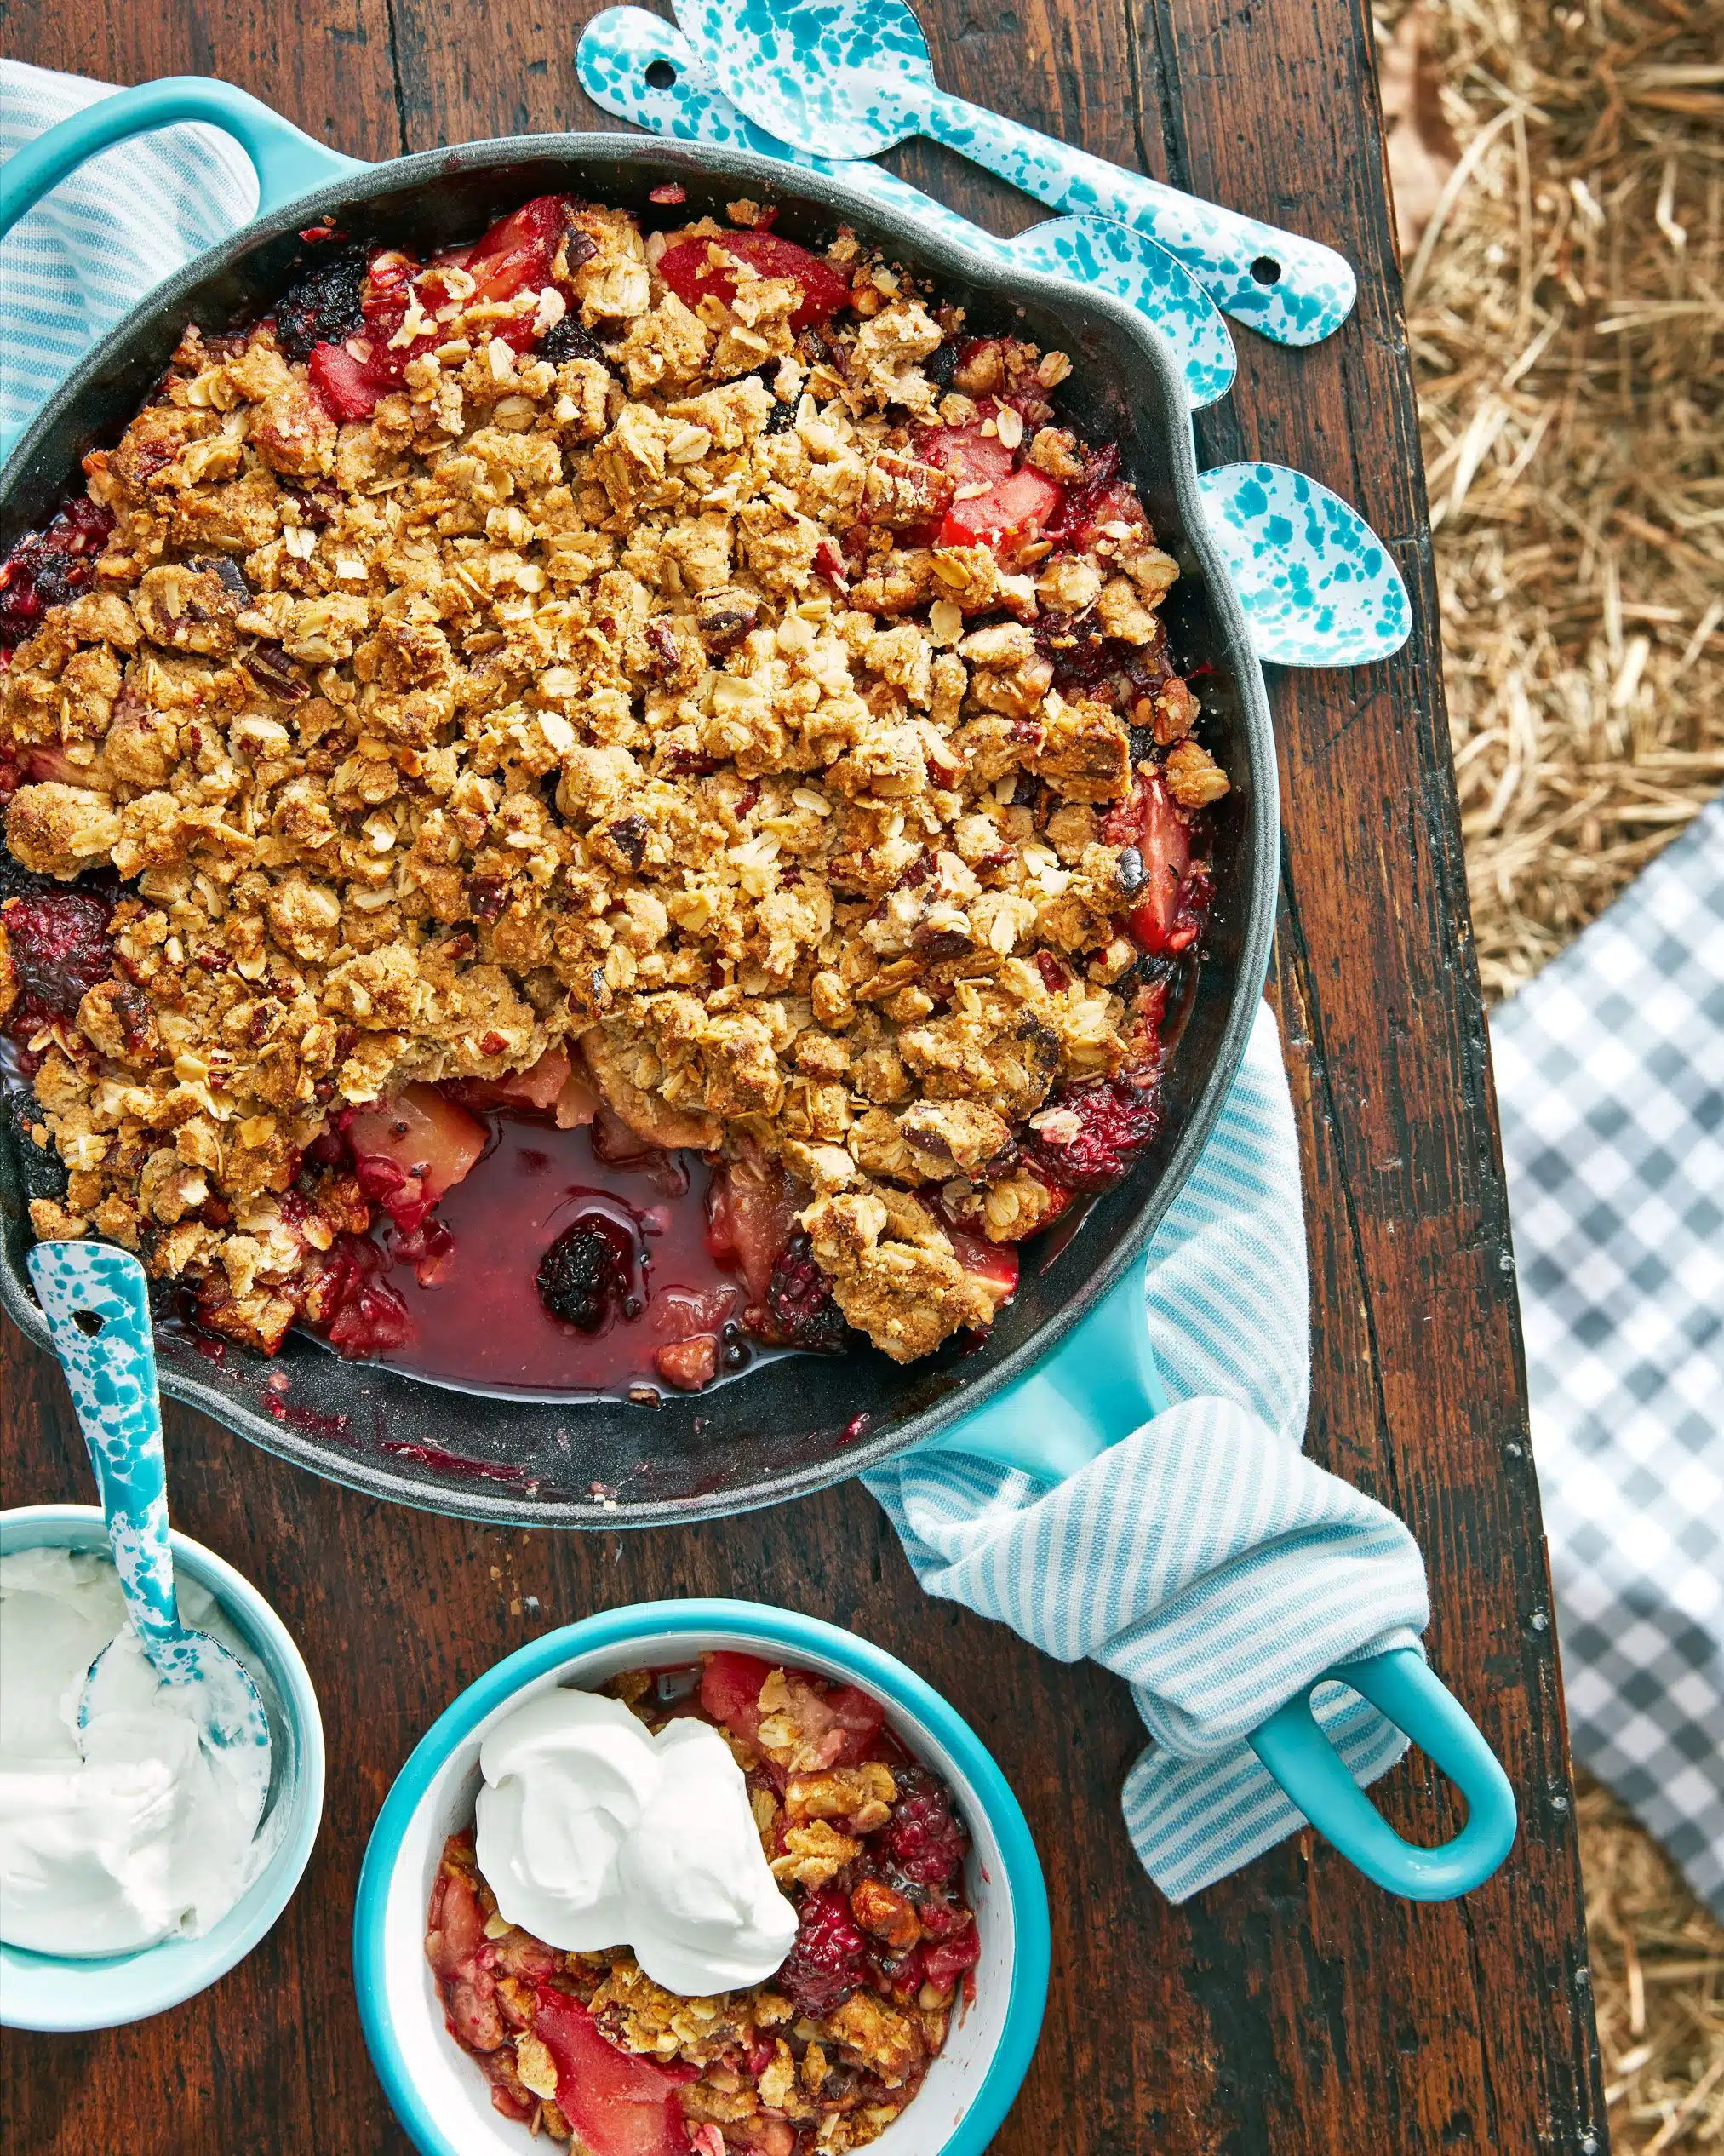 Apple blackberry crumble in a cast iron skillet.